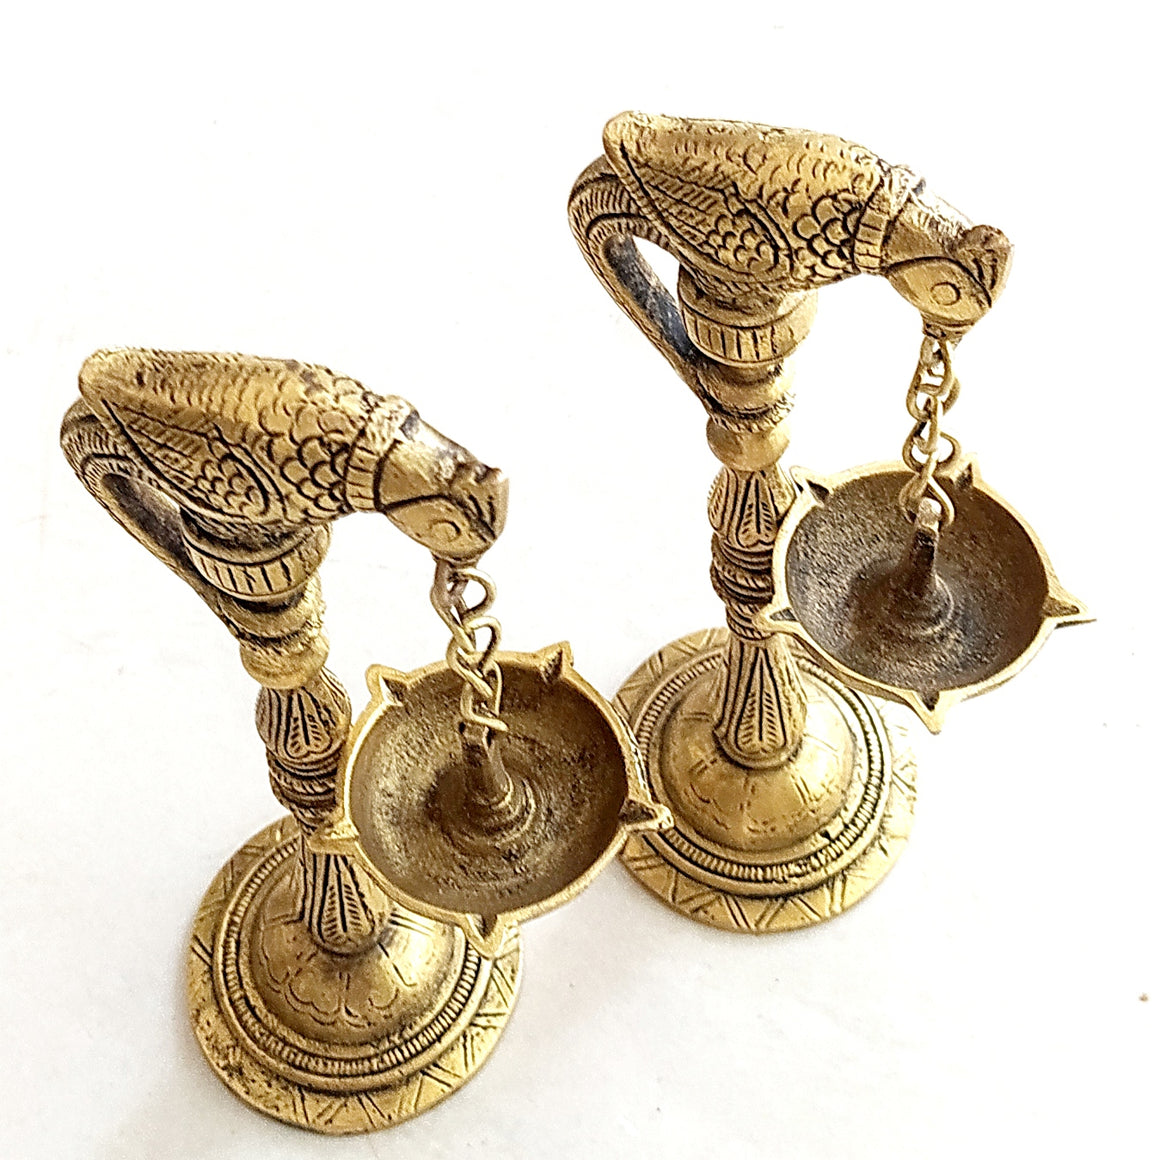 Pair Of Vintage Brass Parrots With Hanging Oil & Wick Lamps On Chains - 19 cm Tall